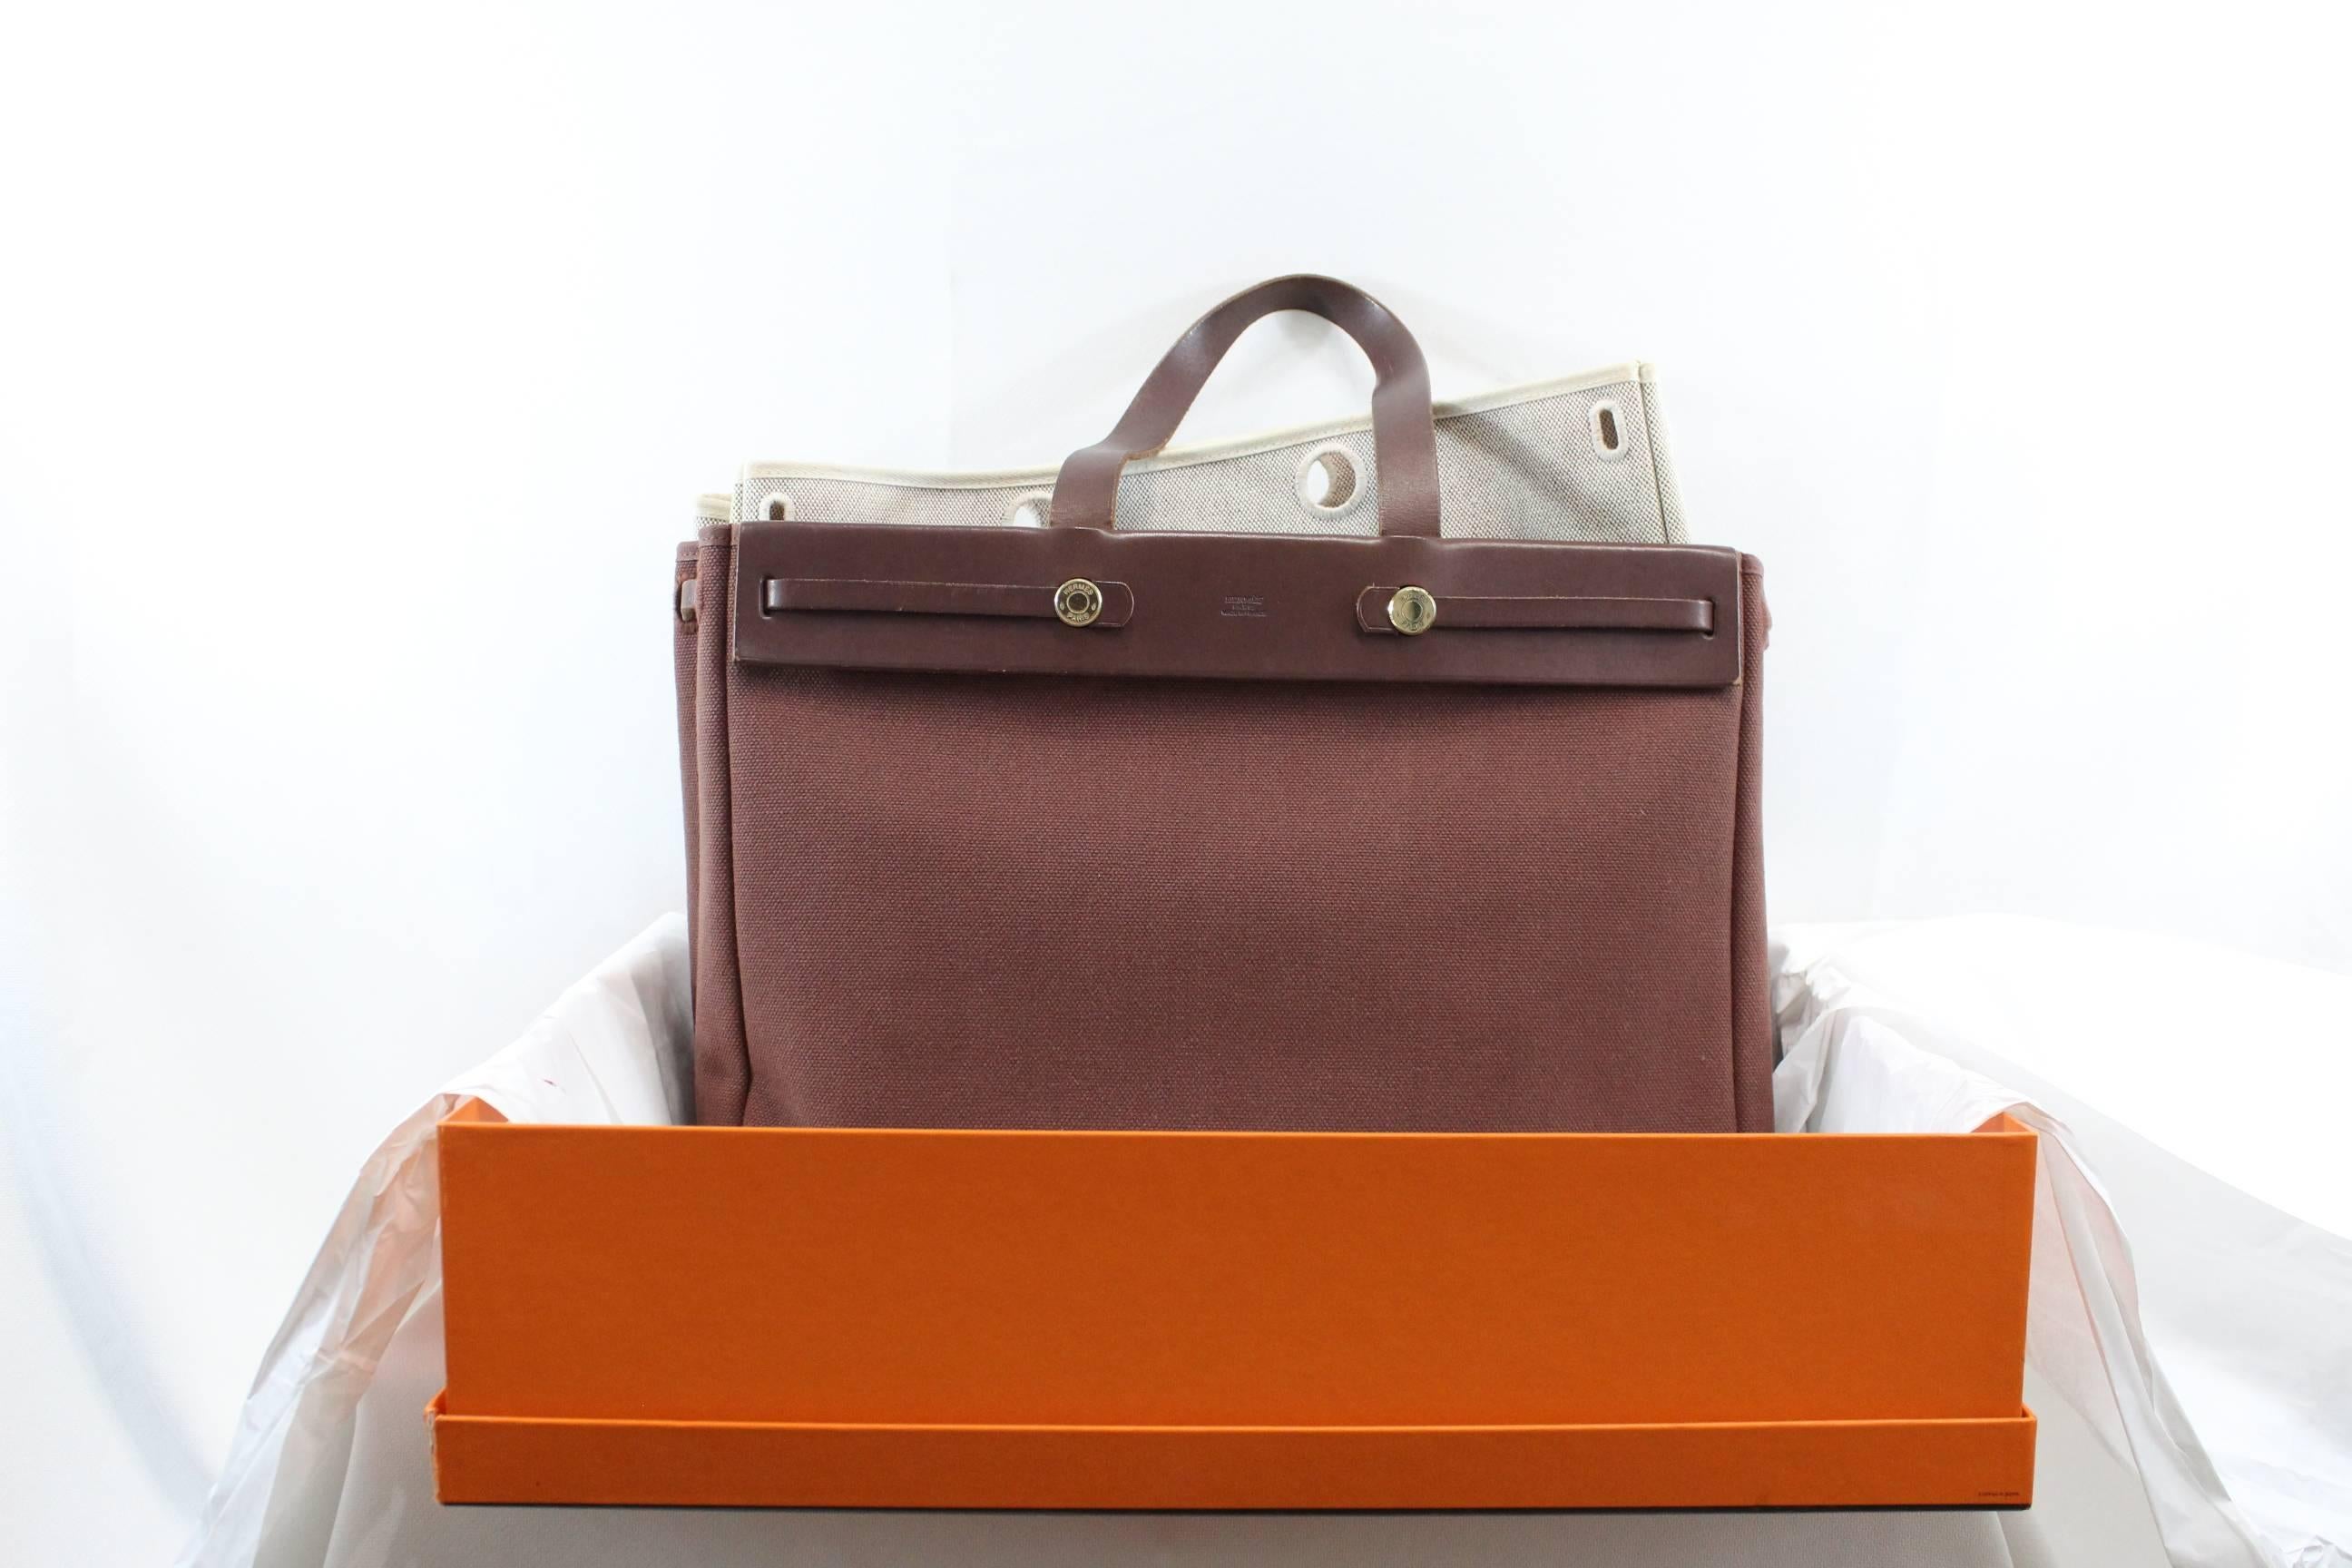 Hermes Herbag GM (16x11,5") in brown chocolate canvas and beige canvas for the smaller tote.Brown leather.Good condition  but some signs of wear.Small stain in the beige canvas (small tote) and inside. Chocolate canvas in really good condition.